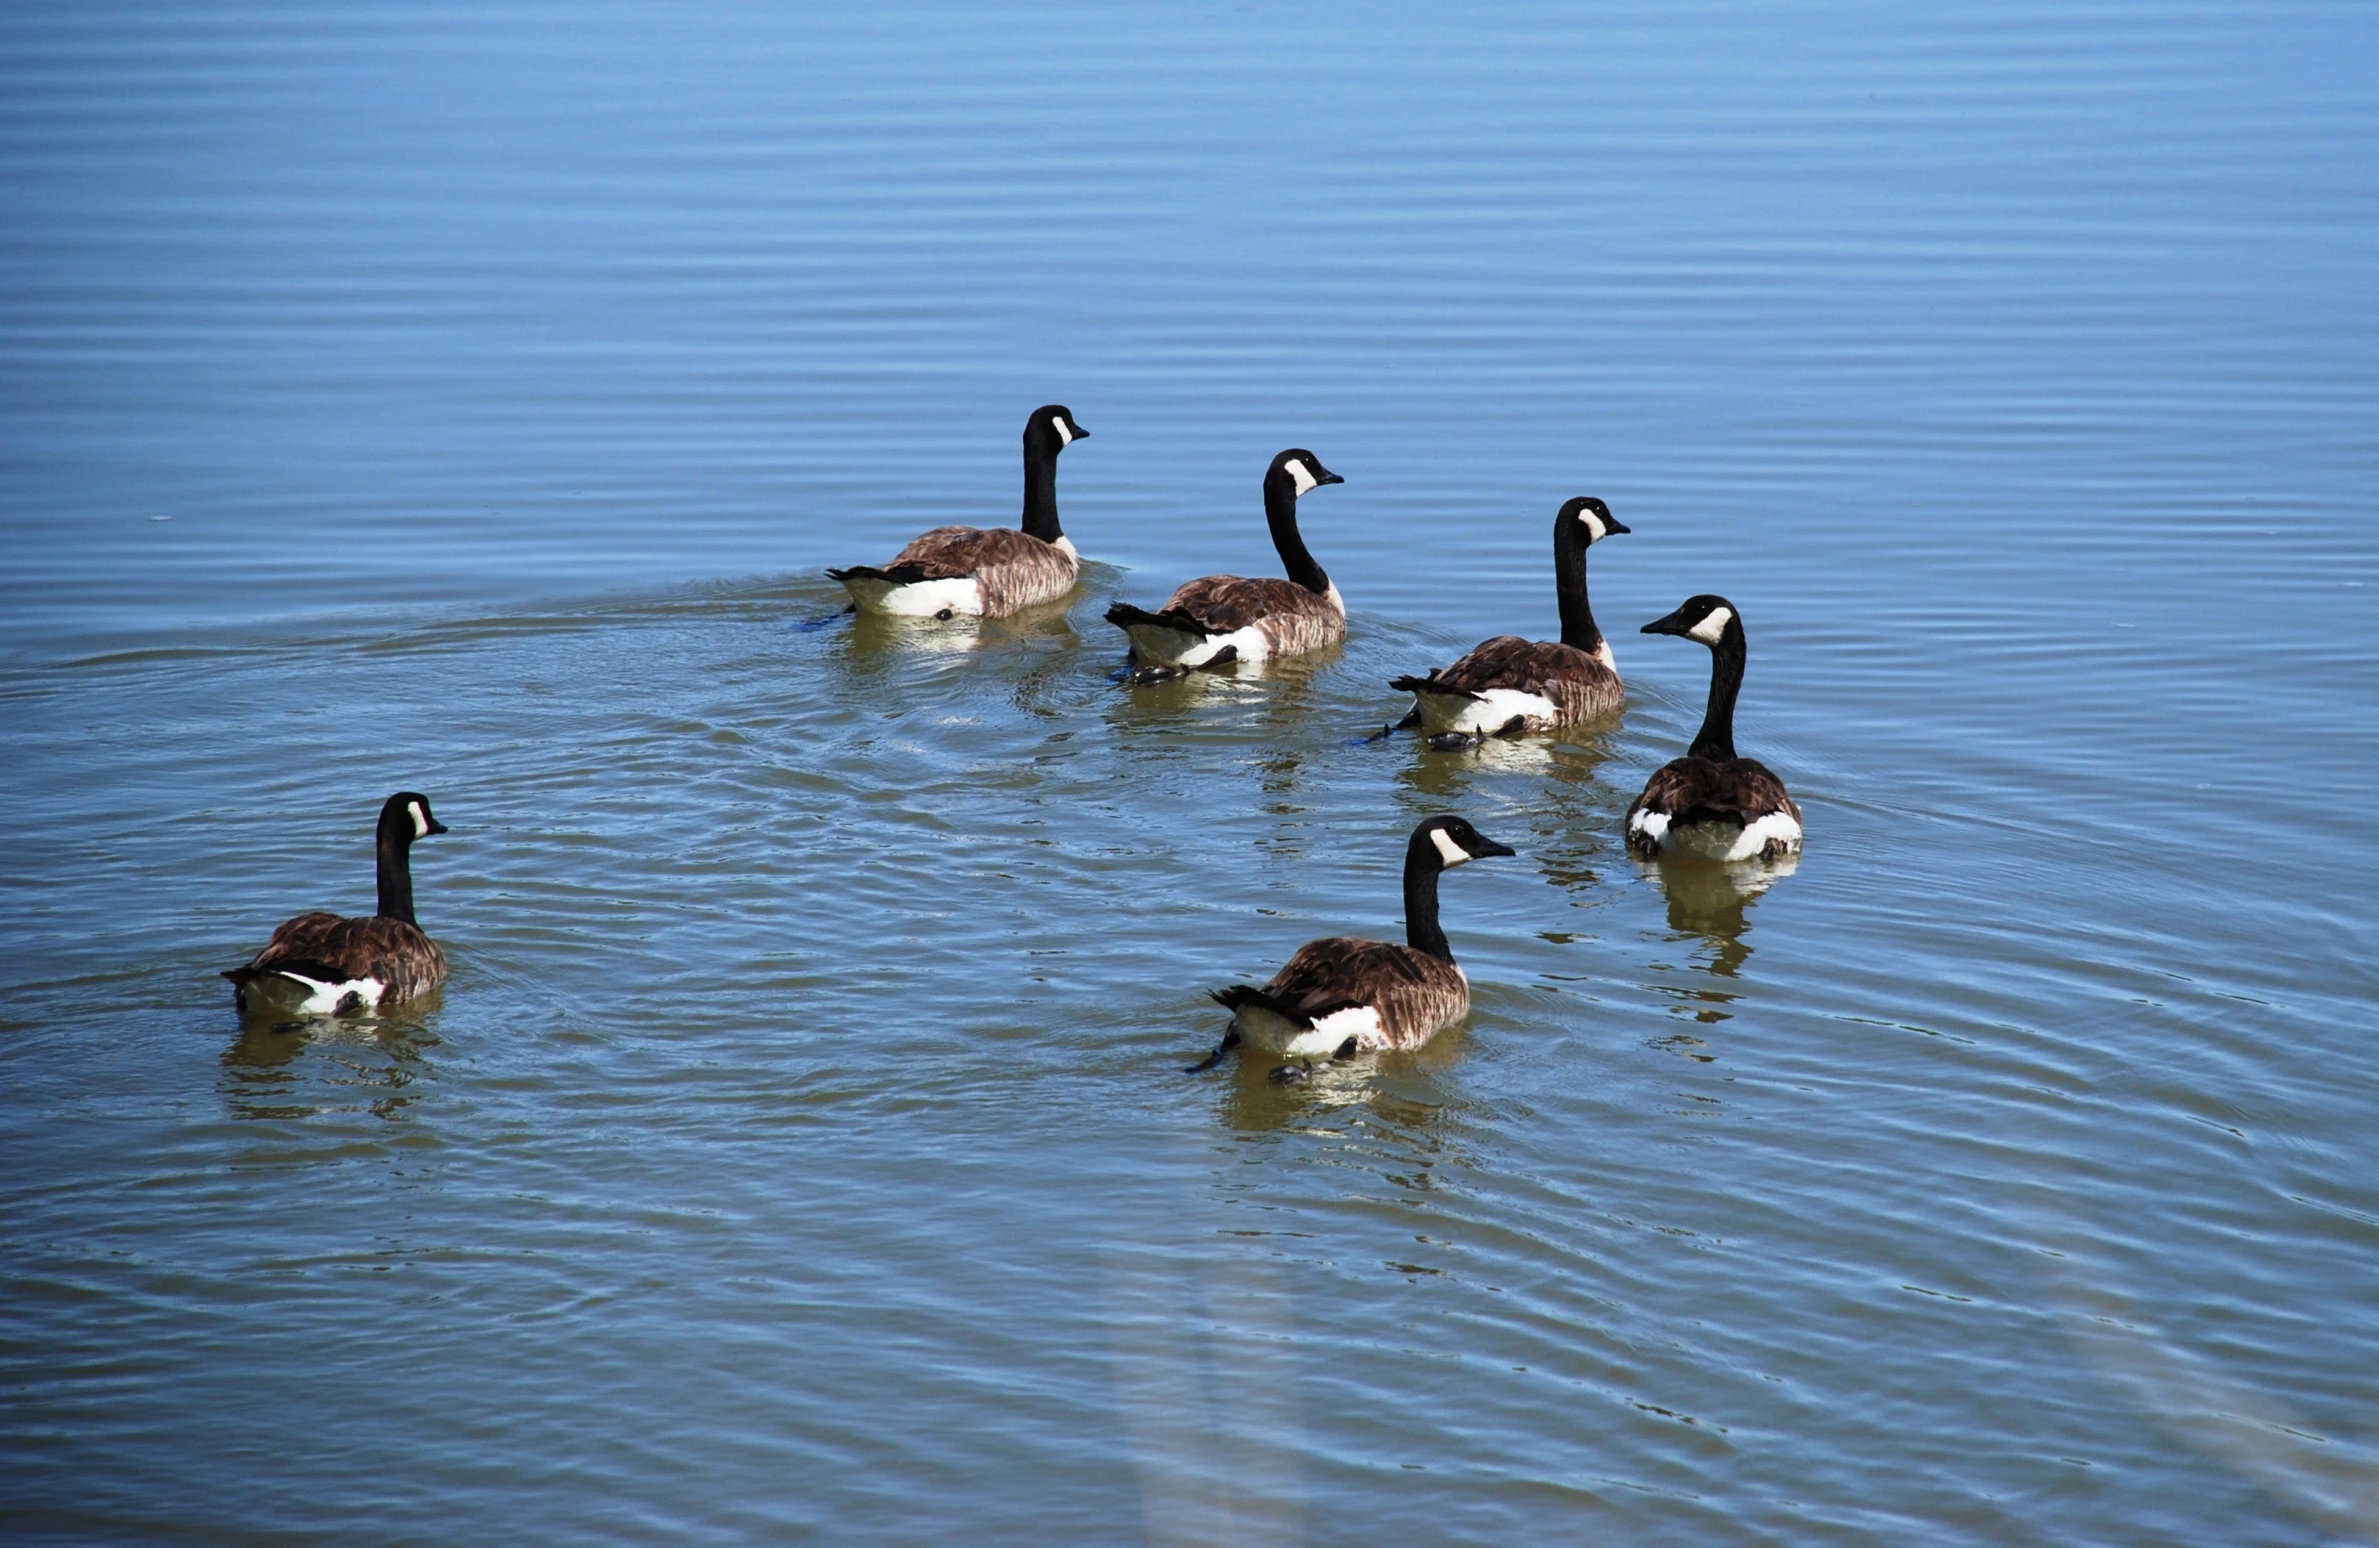 five geese swimming in a lake near the shore